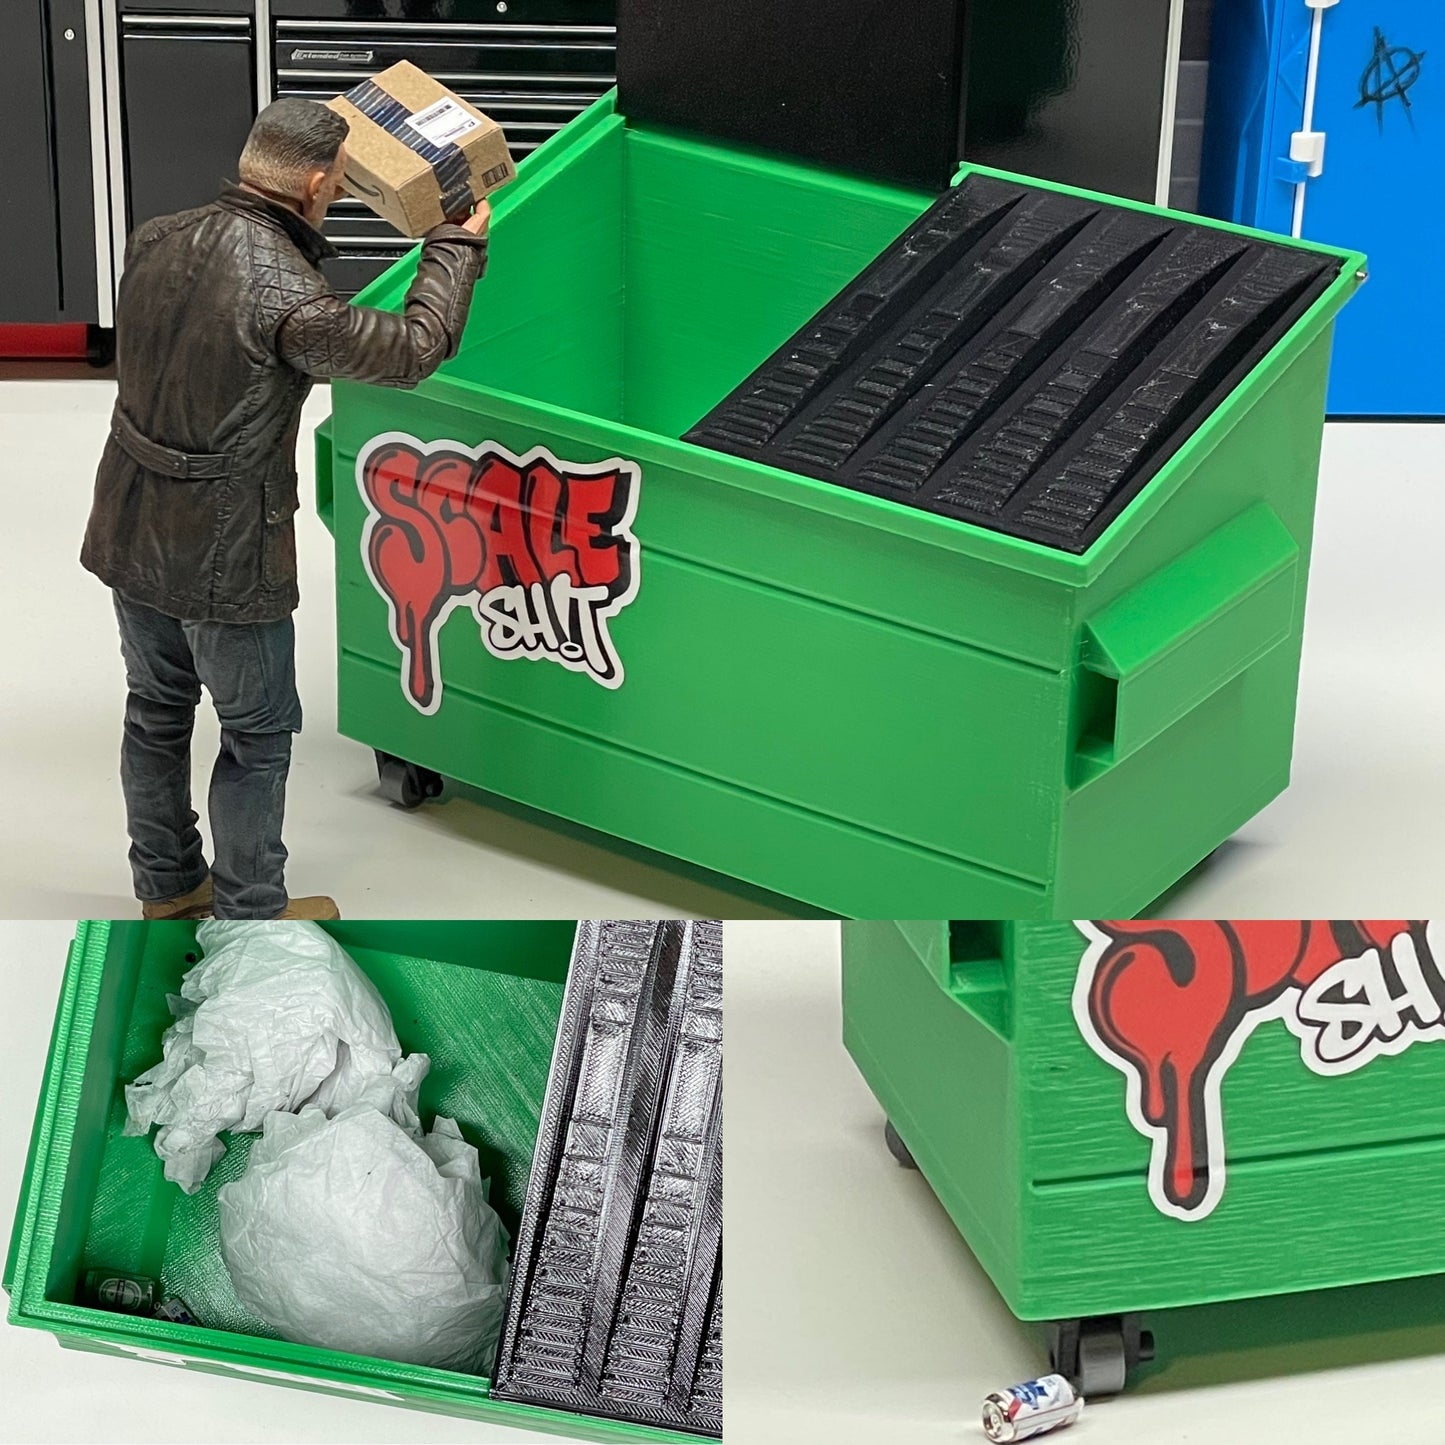 1/10 Scale "Mini MegaDump 6000" Trash Dumpster w/Working Casters, Rubberized Lids and True Scale Sizing